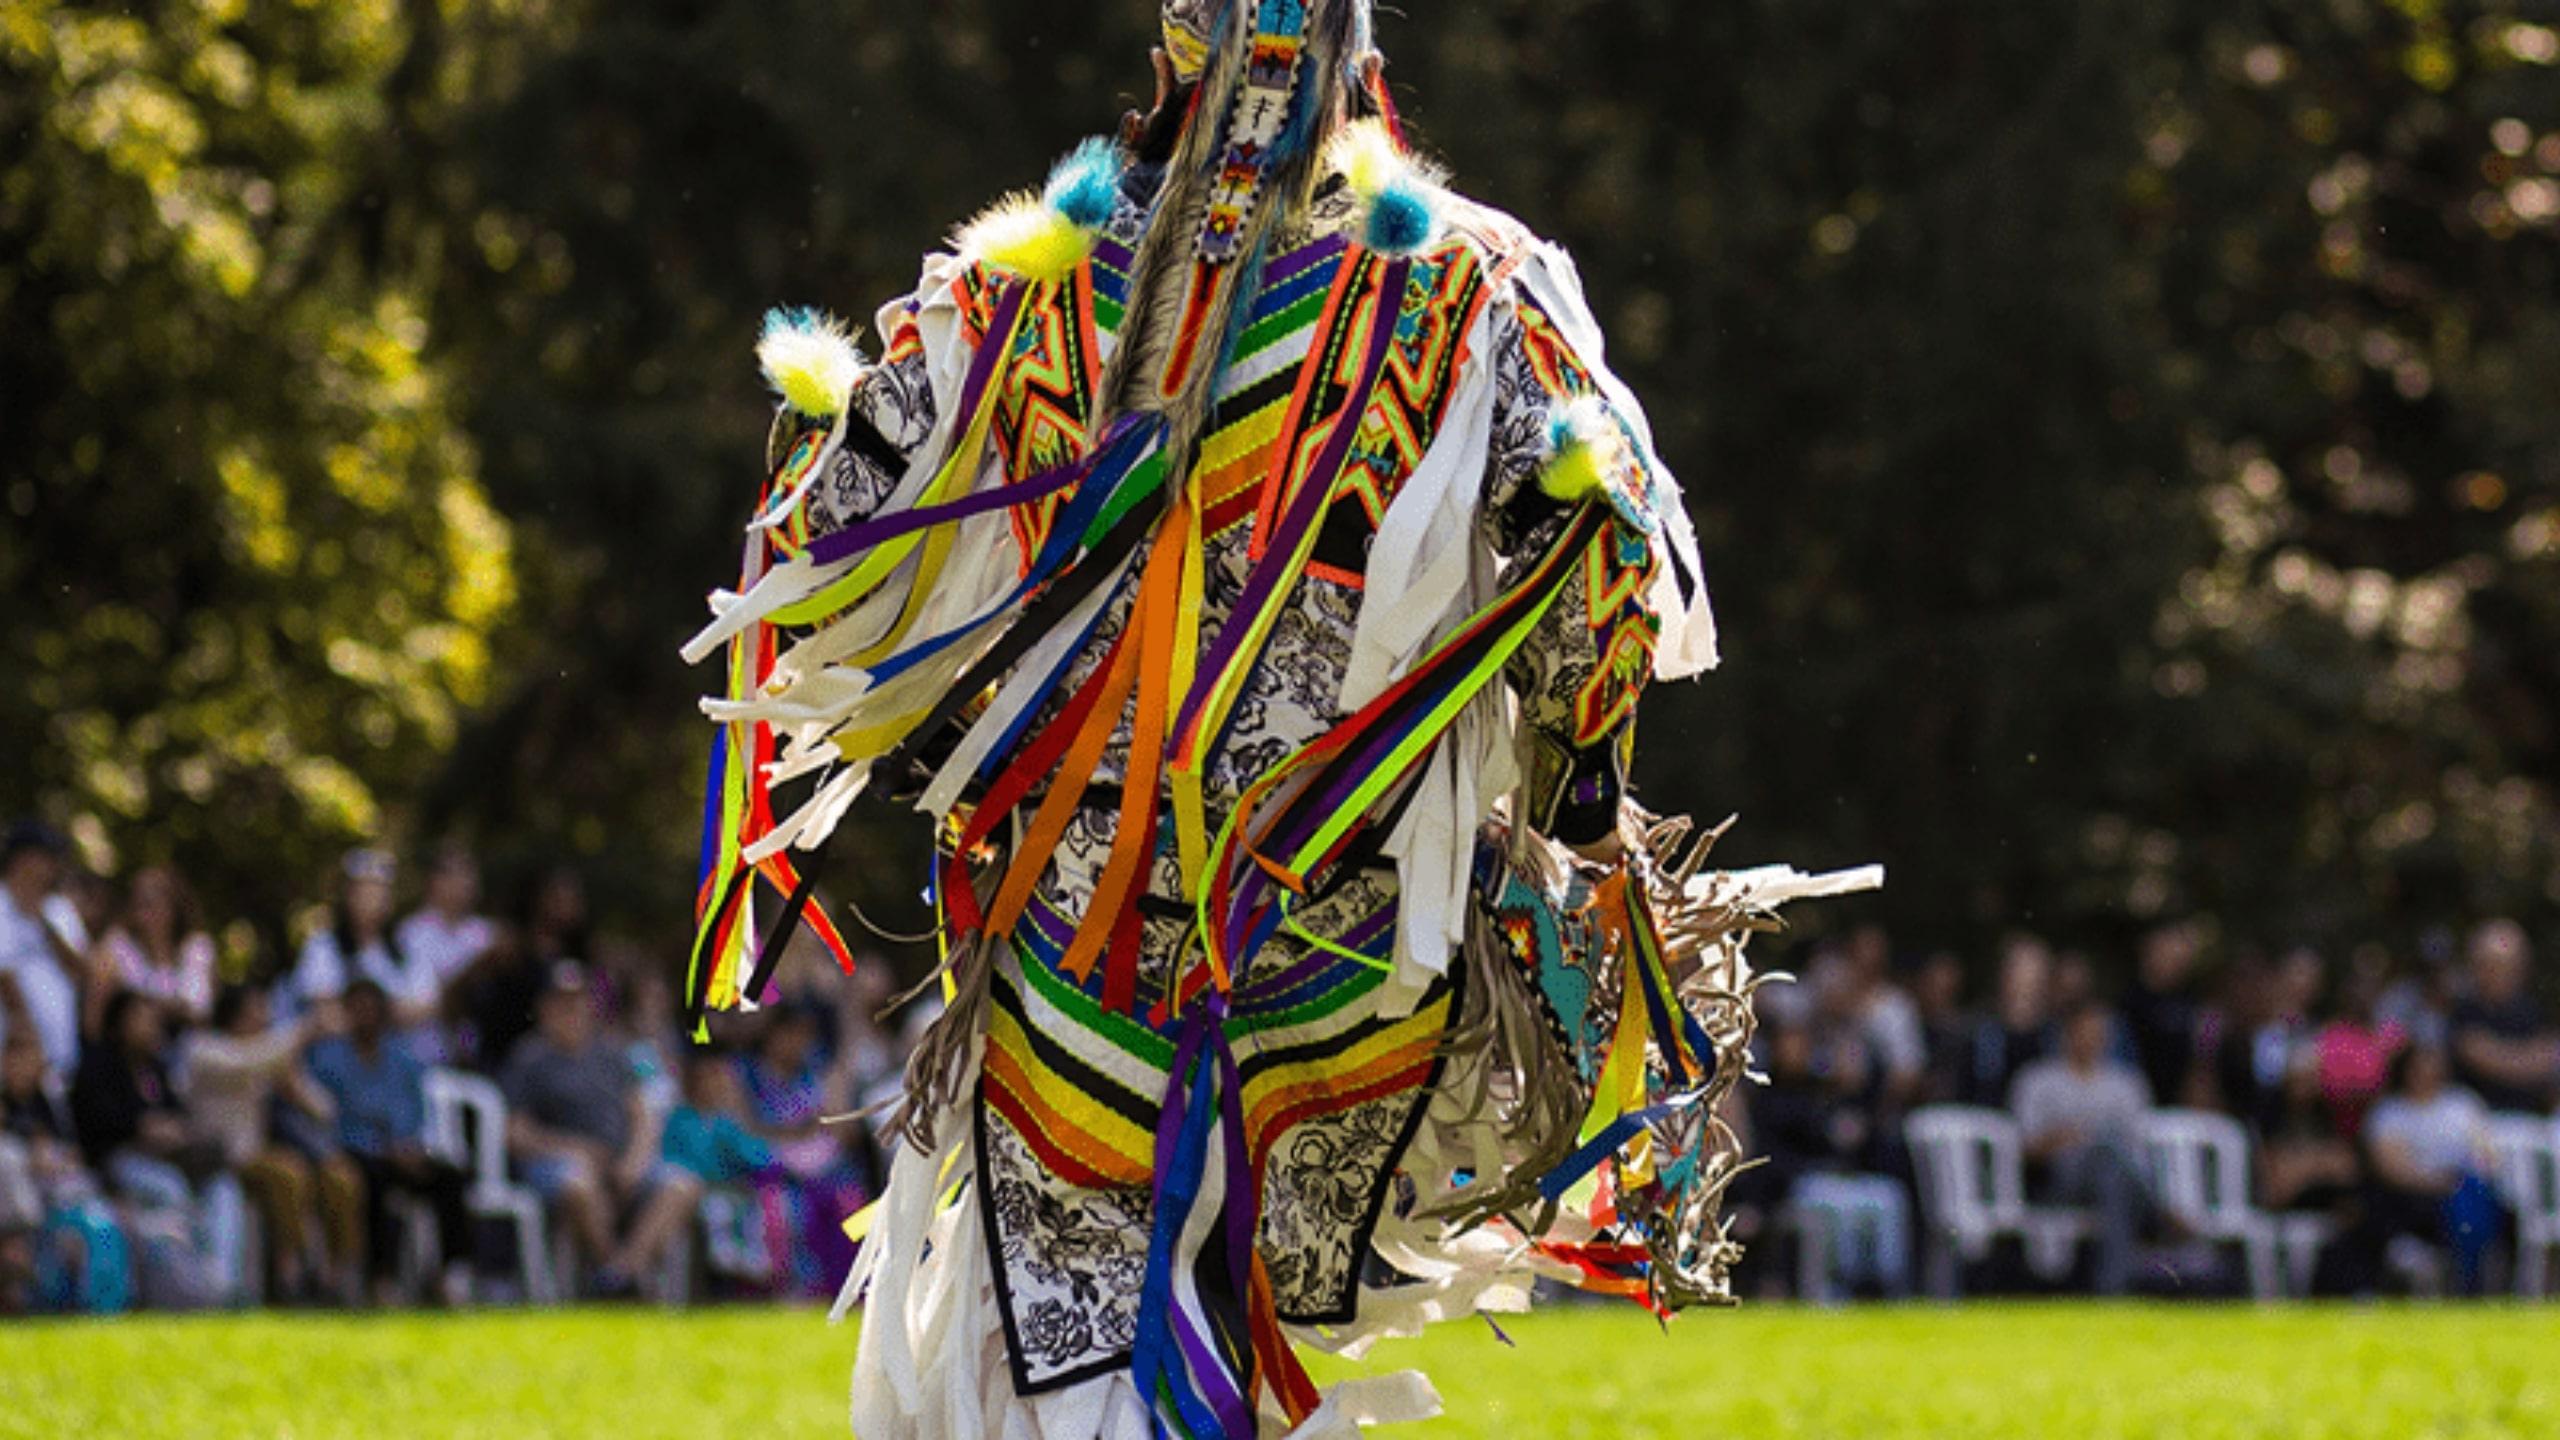 An Indigenous man in a traditional outfit outside in a green space during a past, in-person pow wow